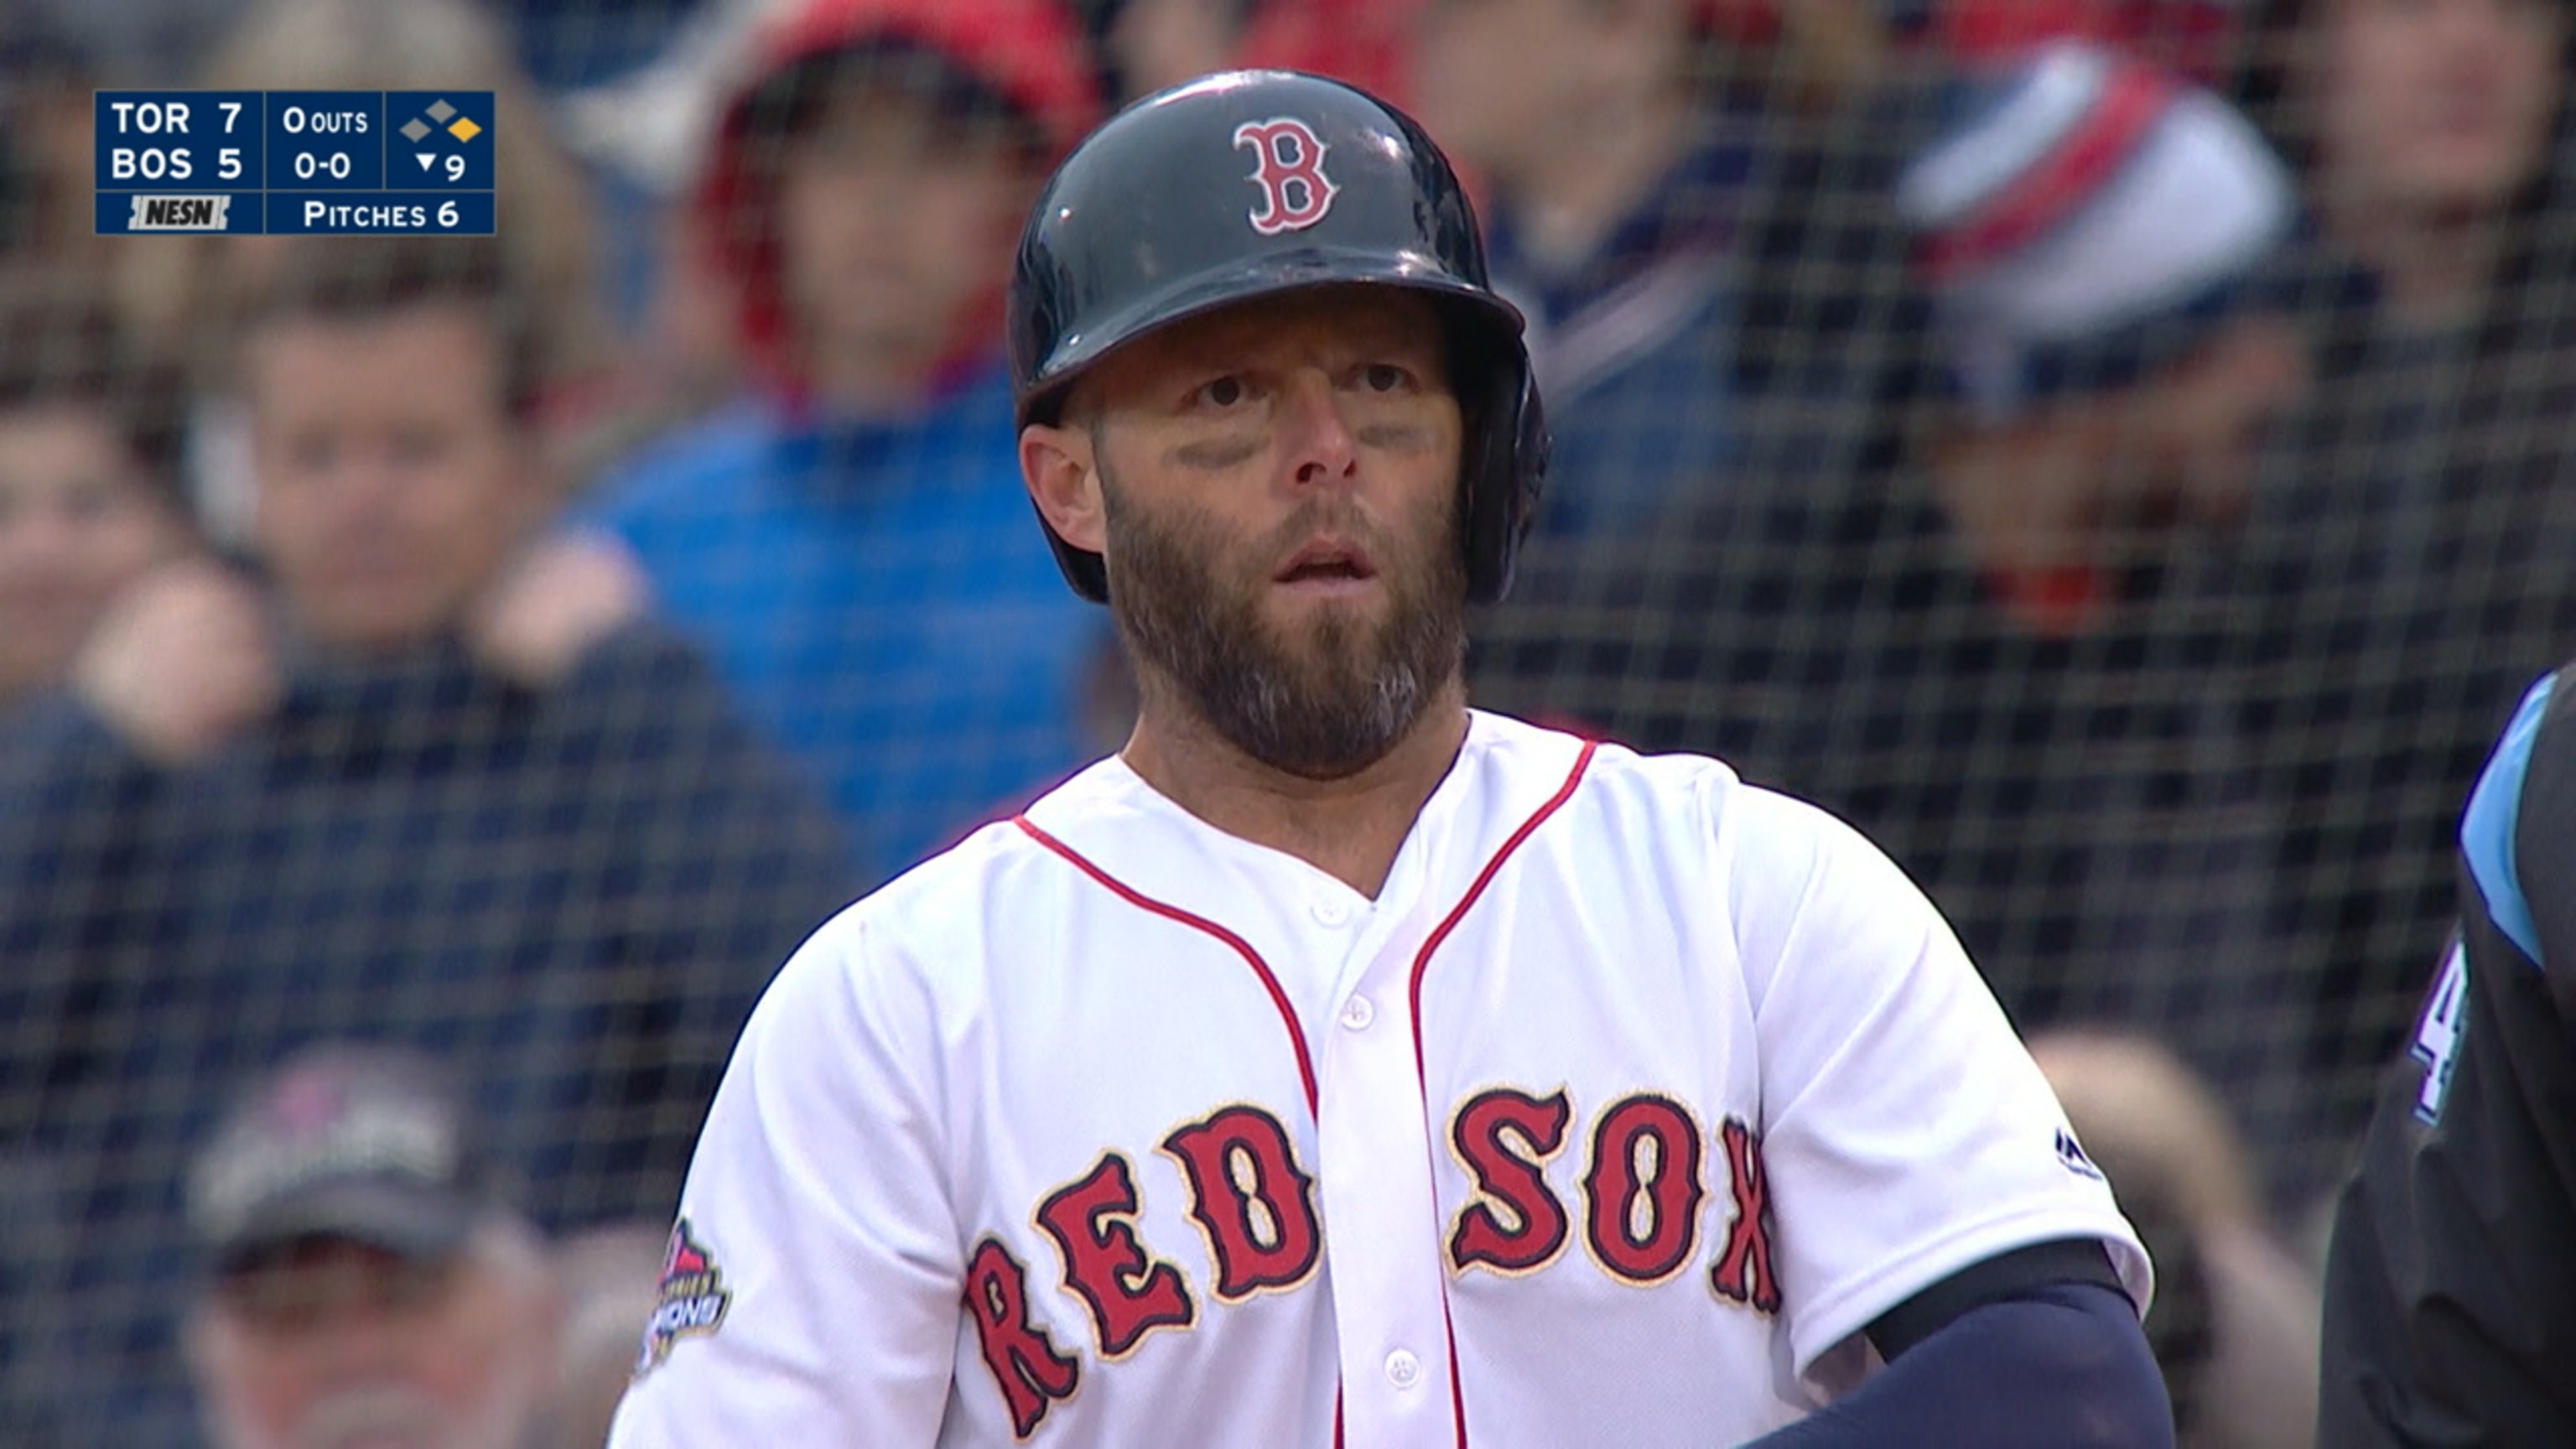 Dustin Pedroia intending to play in 2020